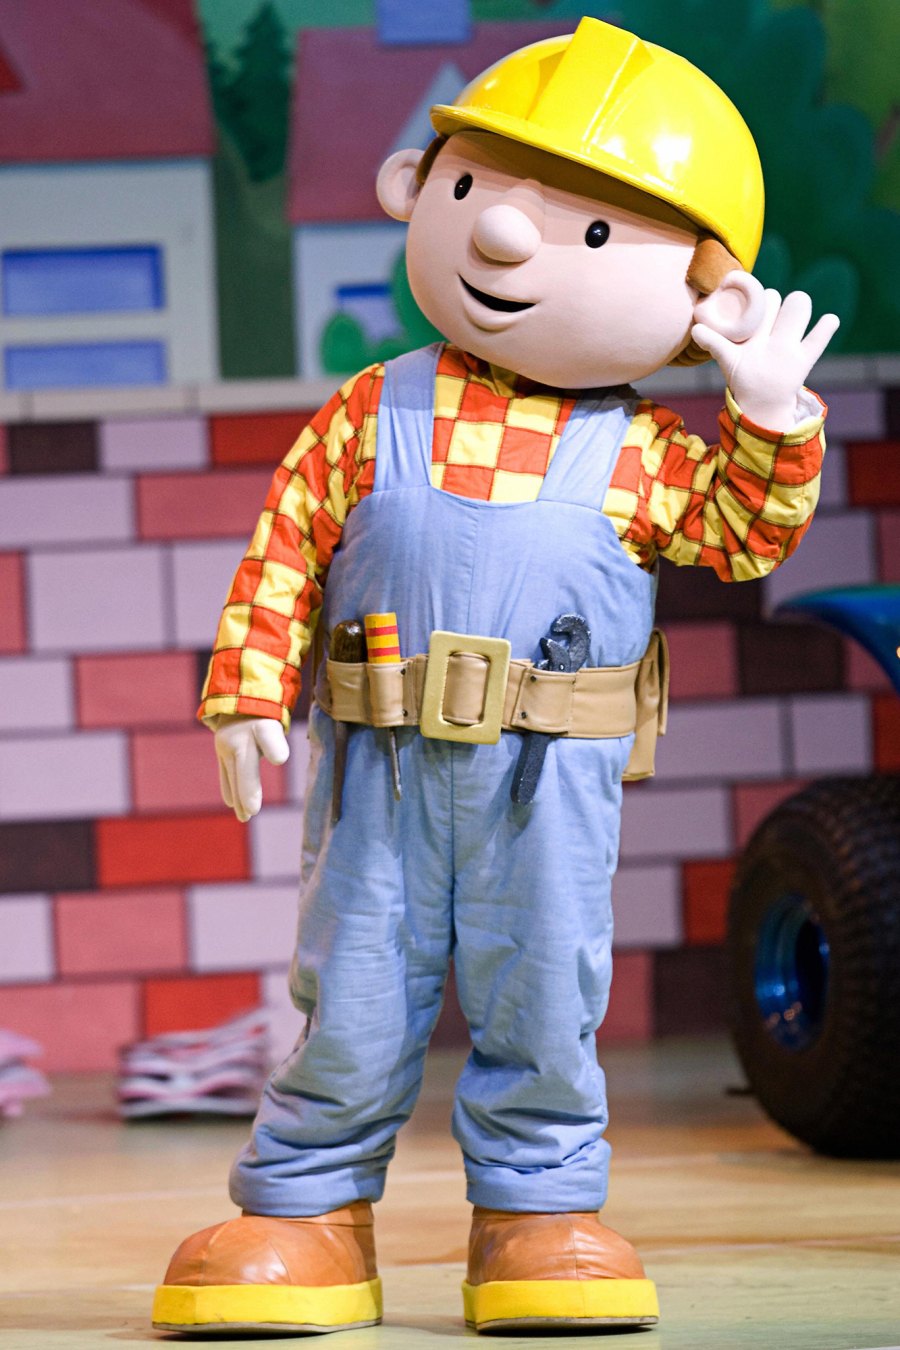 Bob The Builder Every Upcoming Movie Based on Mattel Toys Following Barbie’s Success